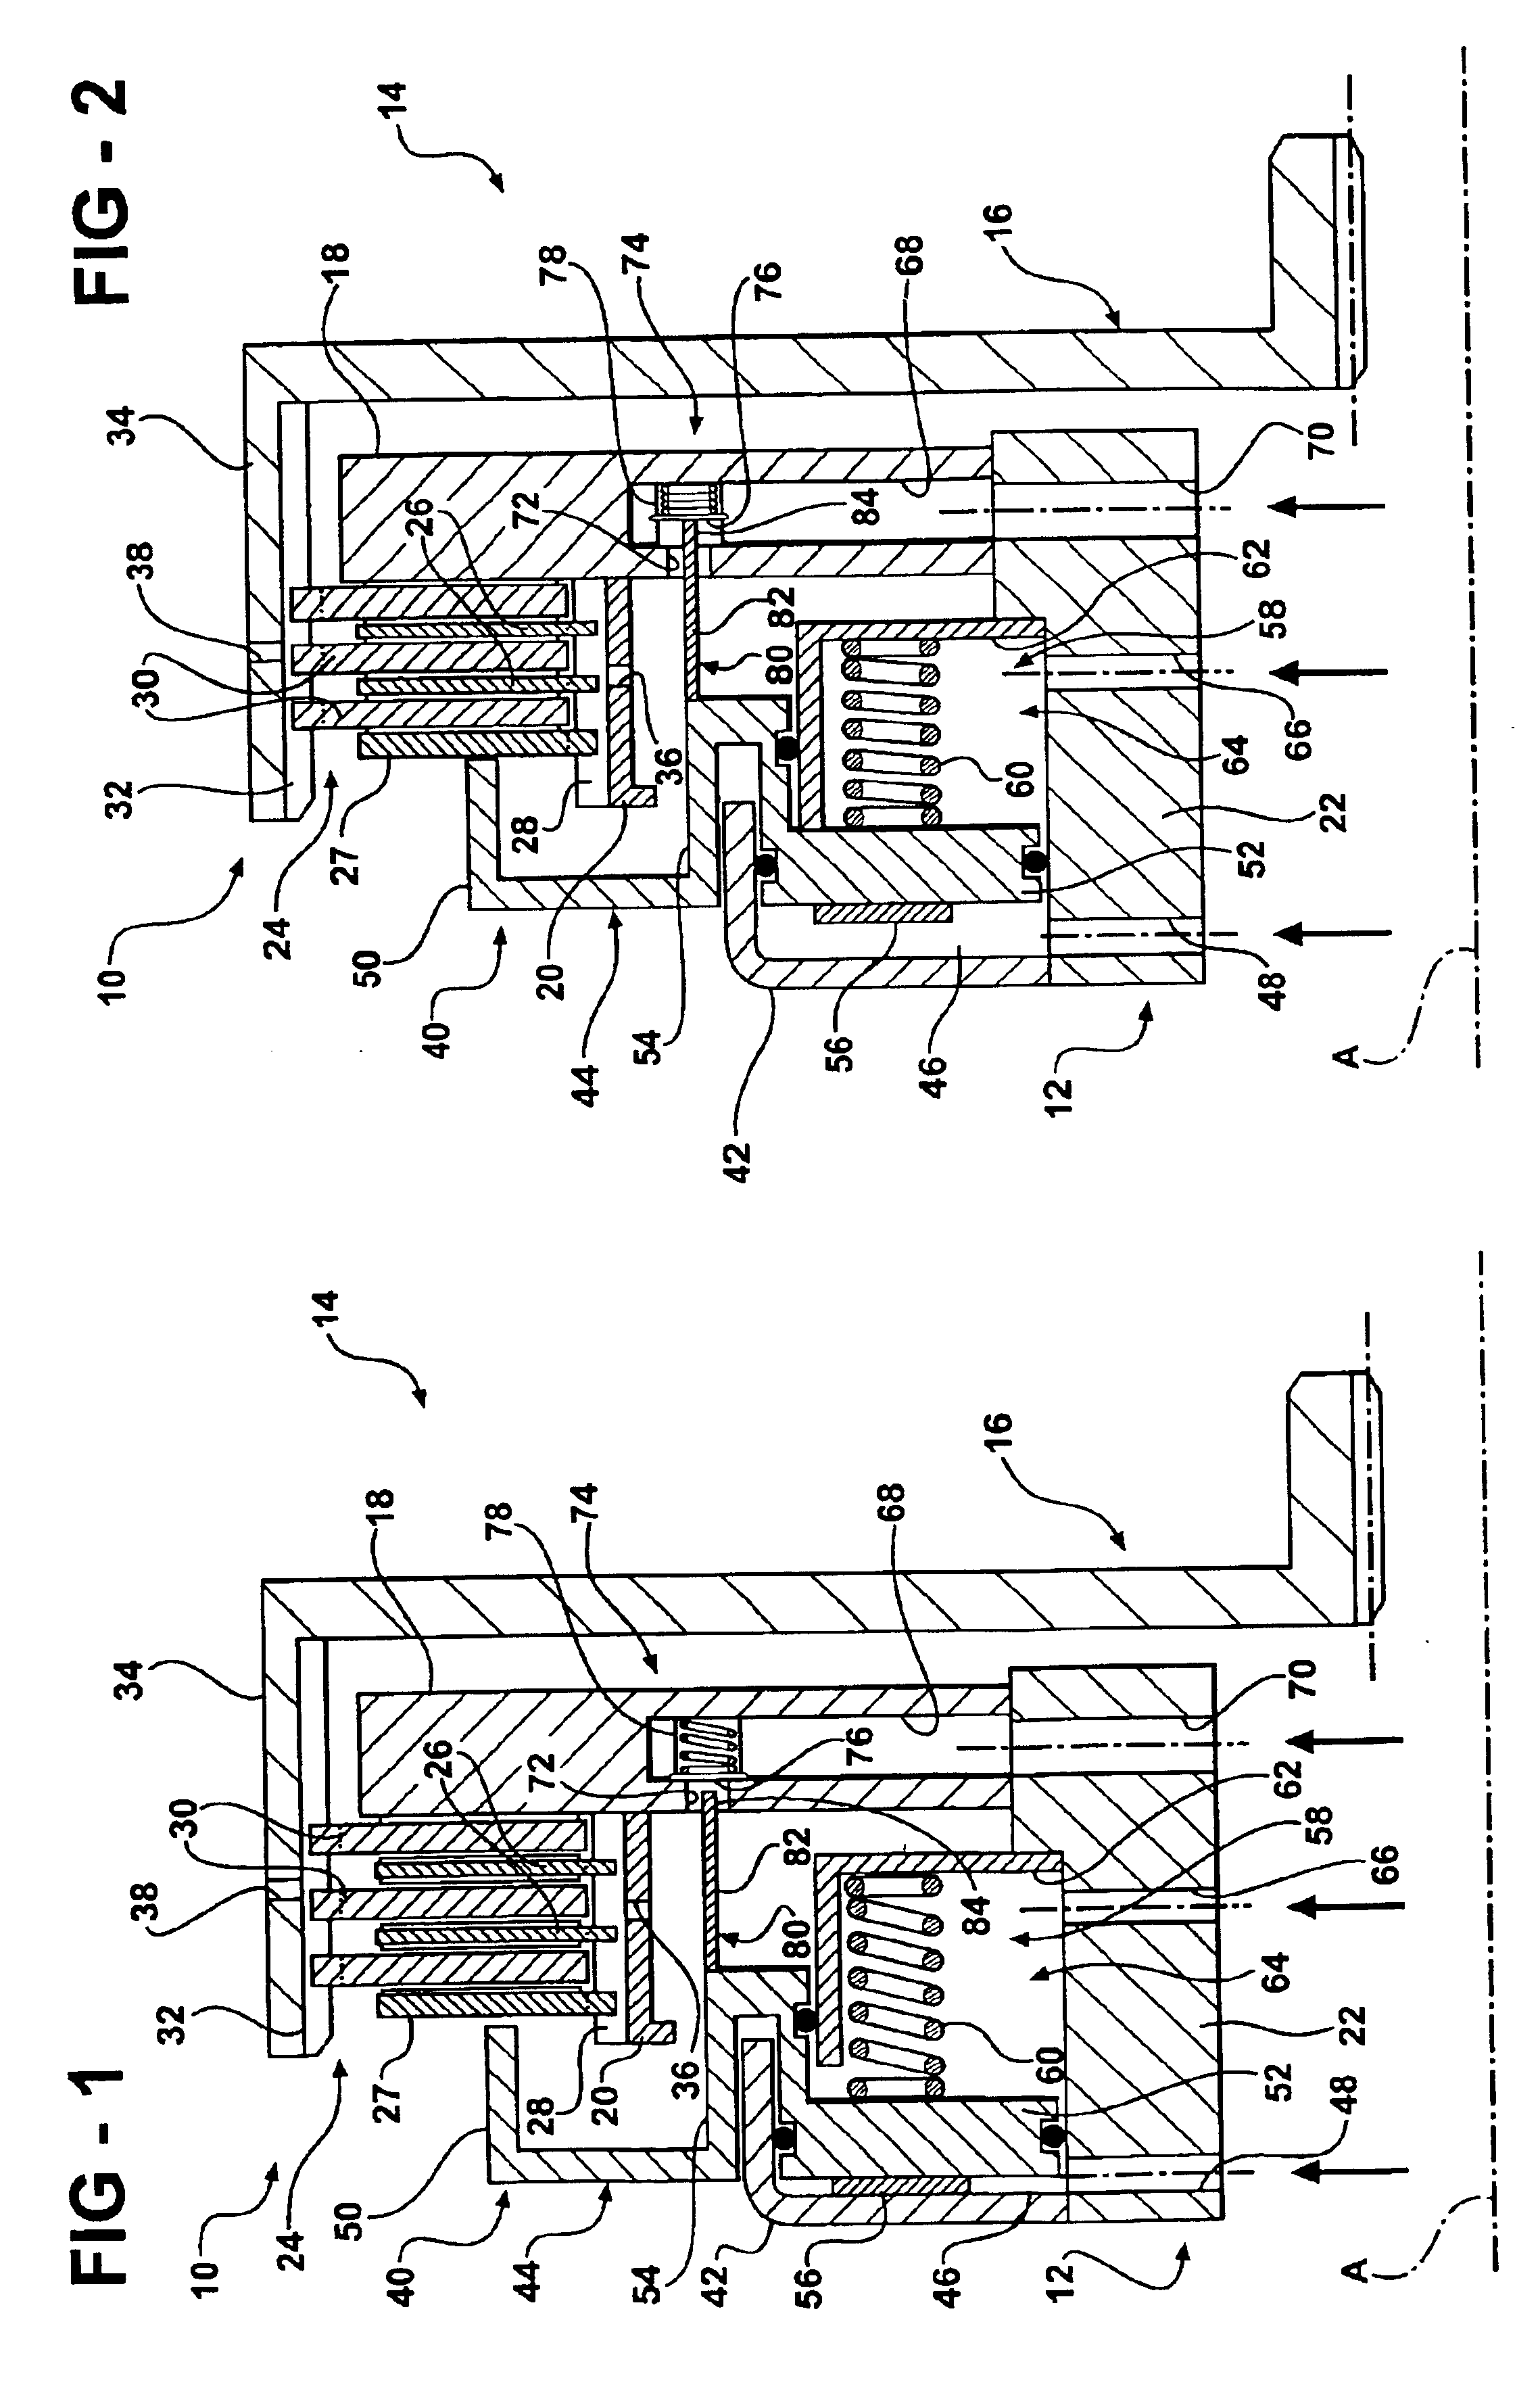 Multi-disk friction device selective lubrication on demand